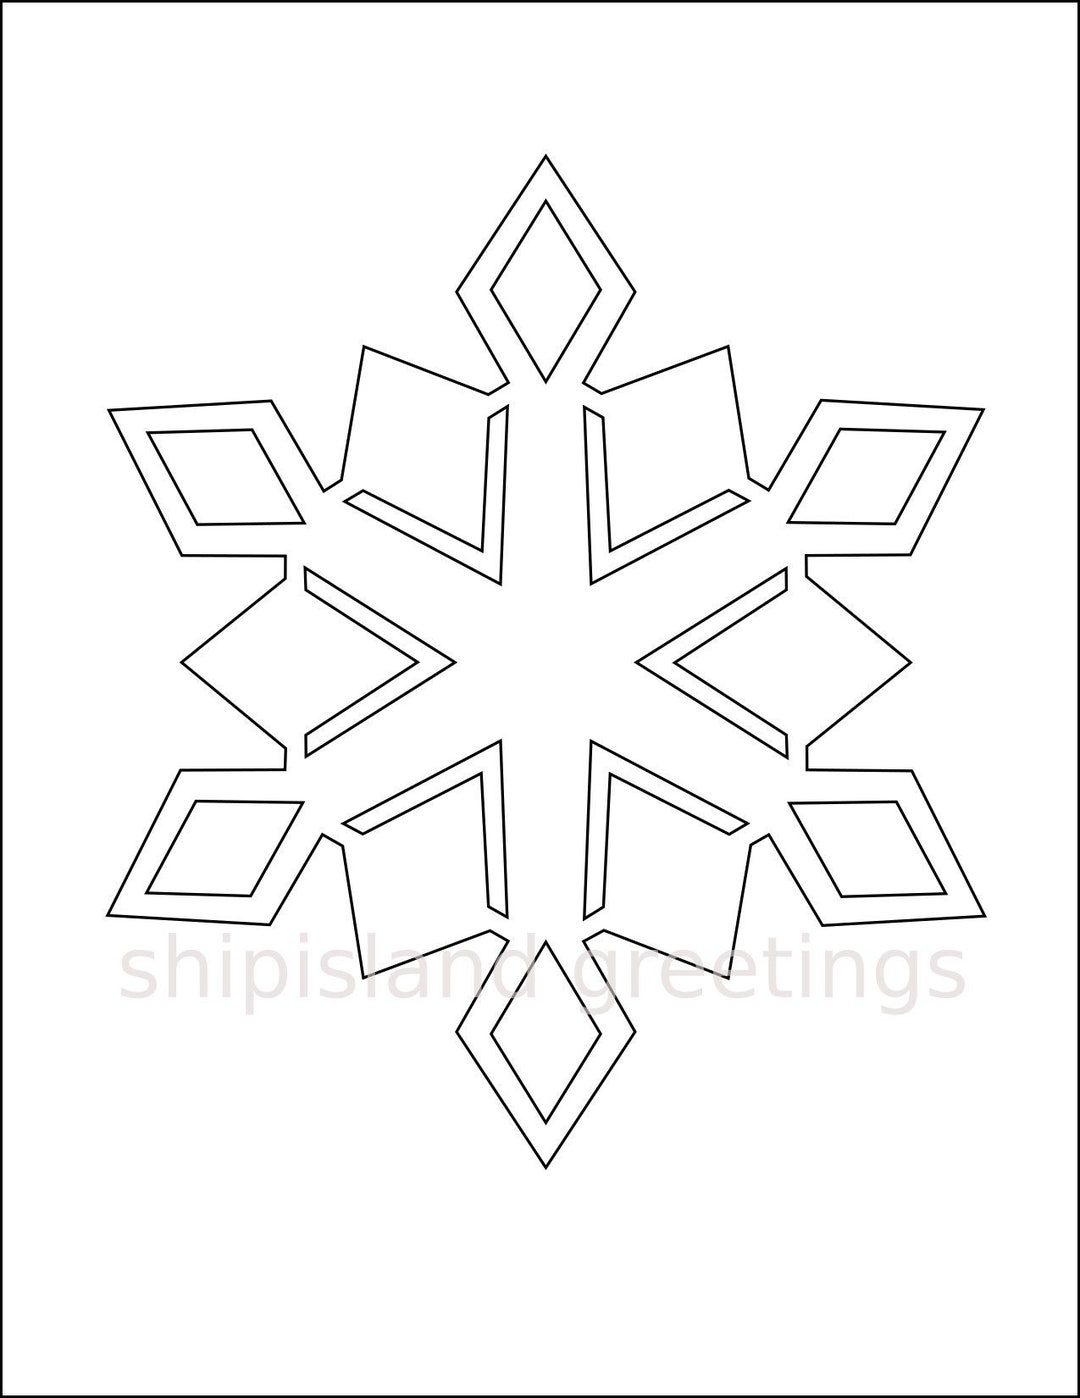 Paper Snowflake Templates, Free Printable Templates & Coloring Pages, FirstPalette.com